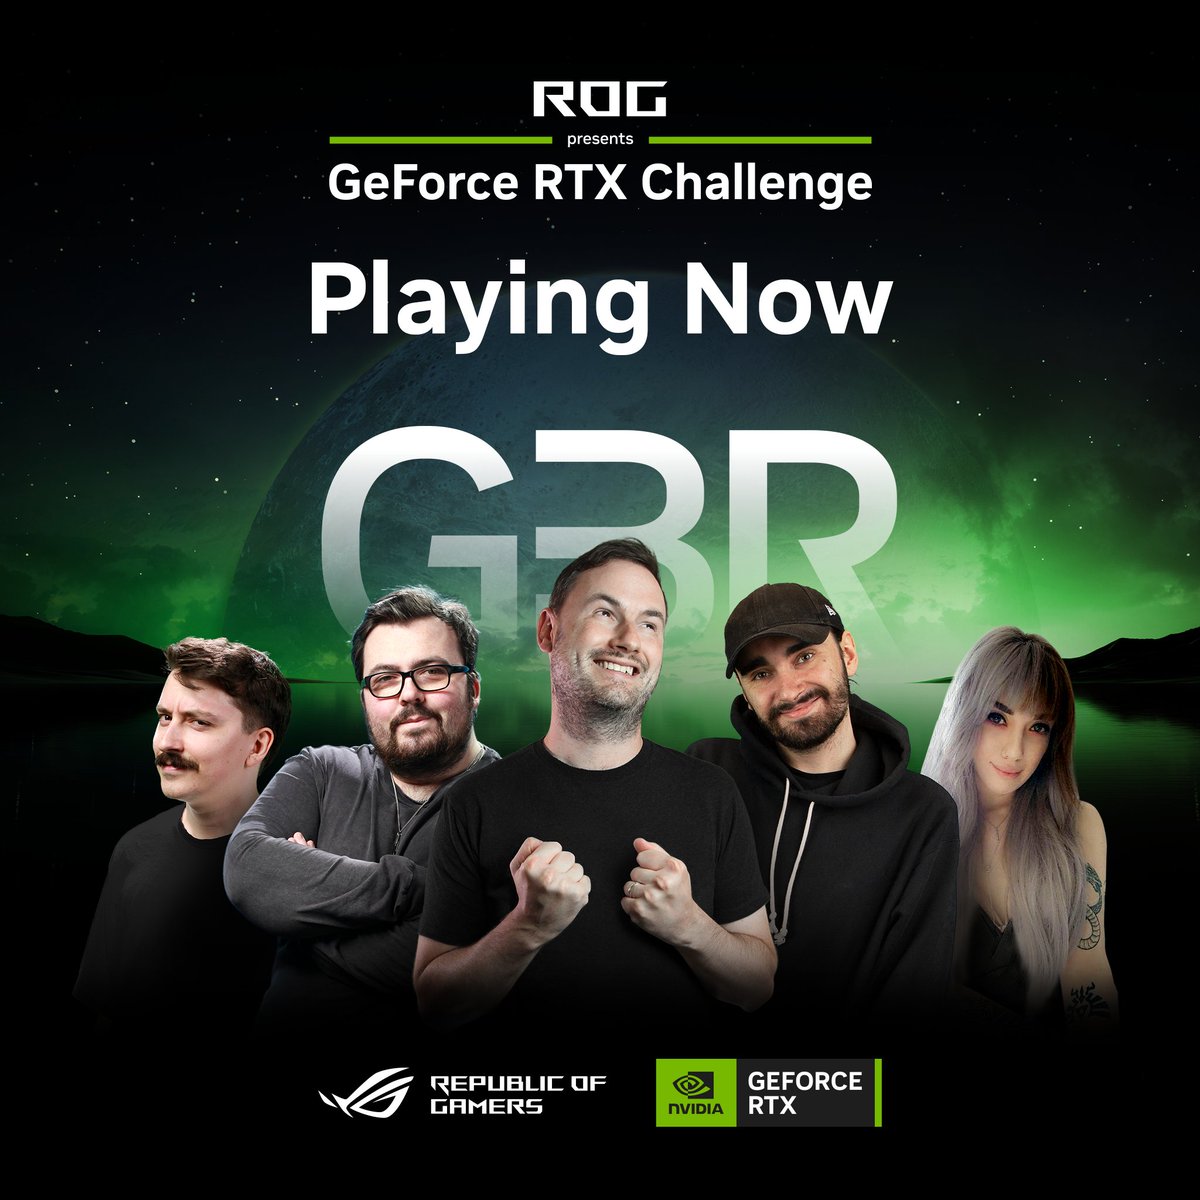 VIVA LA YOGSCAST! It’s time for the second #ROGRTXChallenge of the day as Team Yogs goes head-to-head against Team Spain! Ravs has drank at least six coffees and is ready to rumble. We're LIVE! twitch.tv/yogscast @NVIDIAGeForceUK #ad